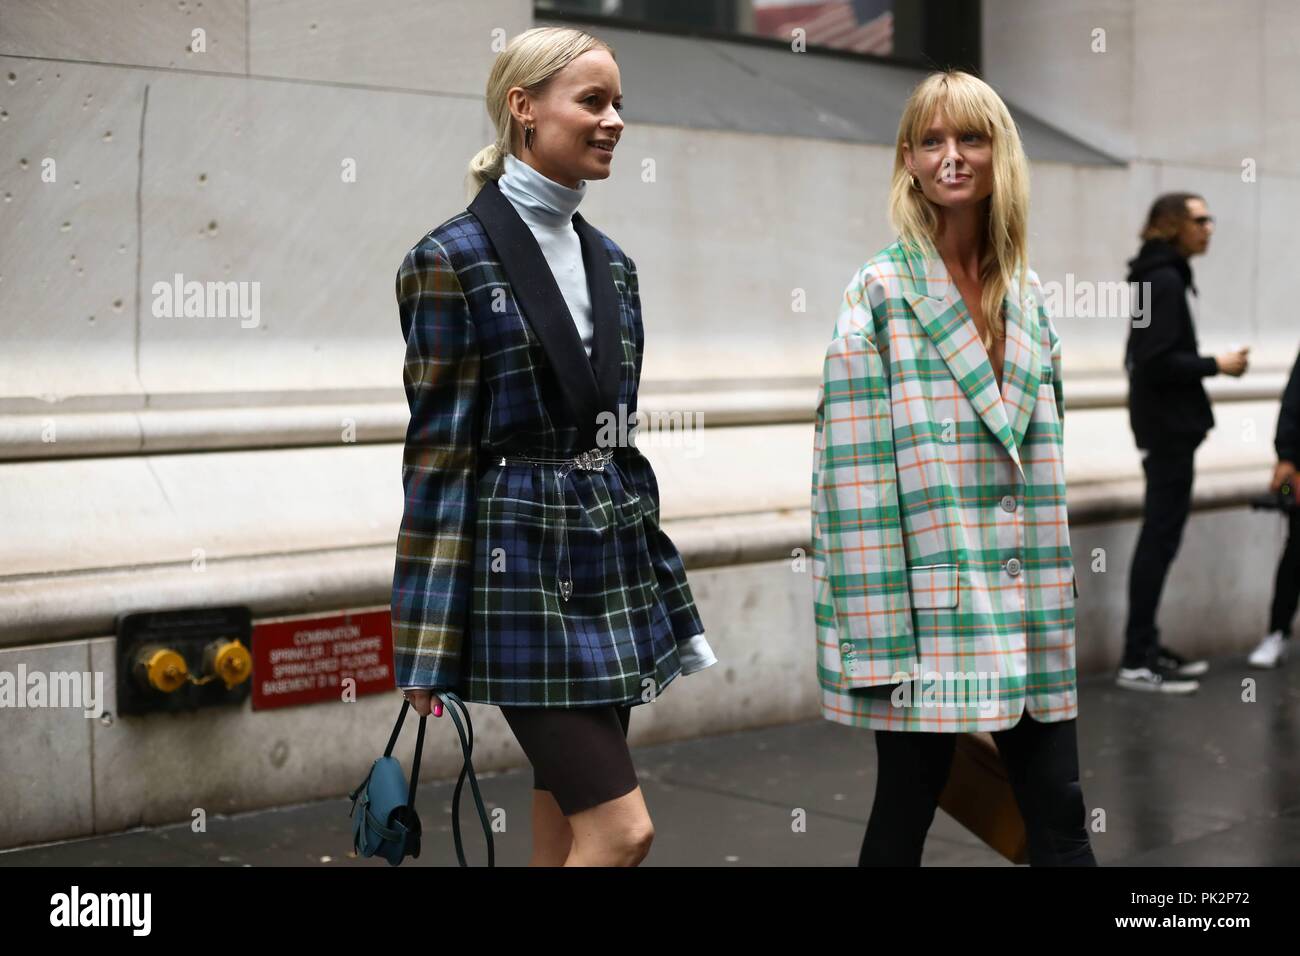 Thora Valdimarsdottir and Jeanette Friis Madsen posing on the street outside the Tibi show during New York Fashion Week - Sept 9, 2018 - Photo: Runway Manhattan ***For Editorial Use Only?*** | Verwendung weltweit Stock Photo